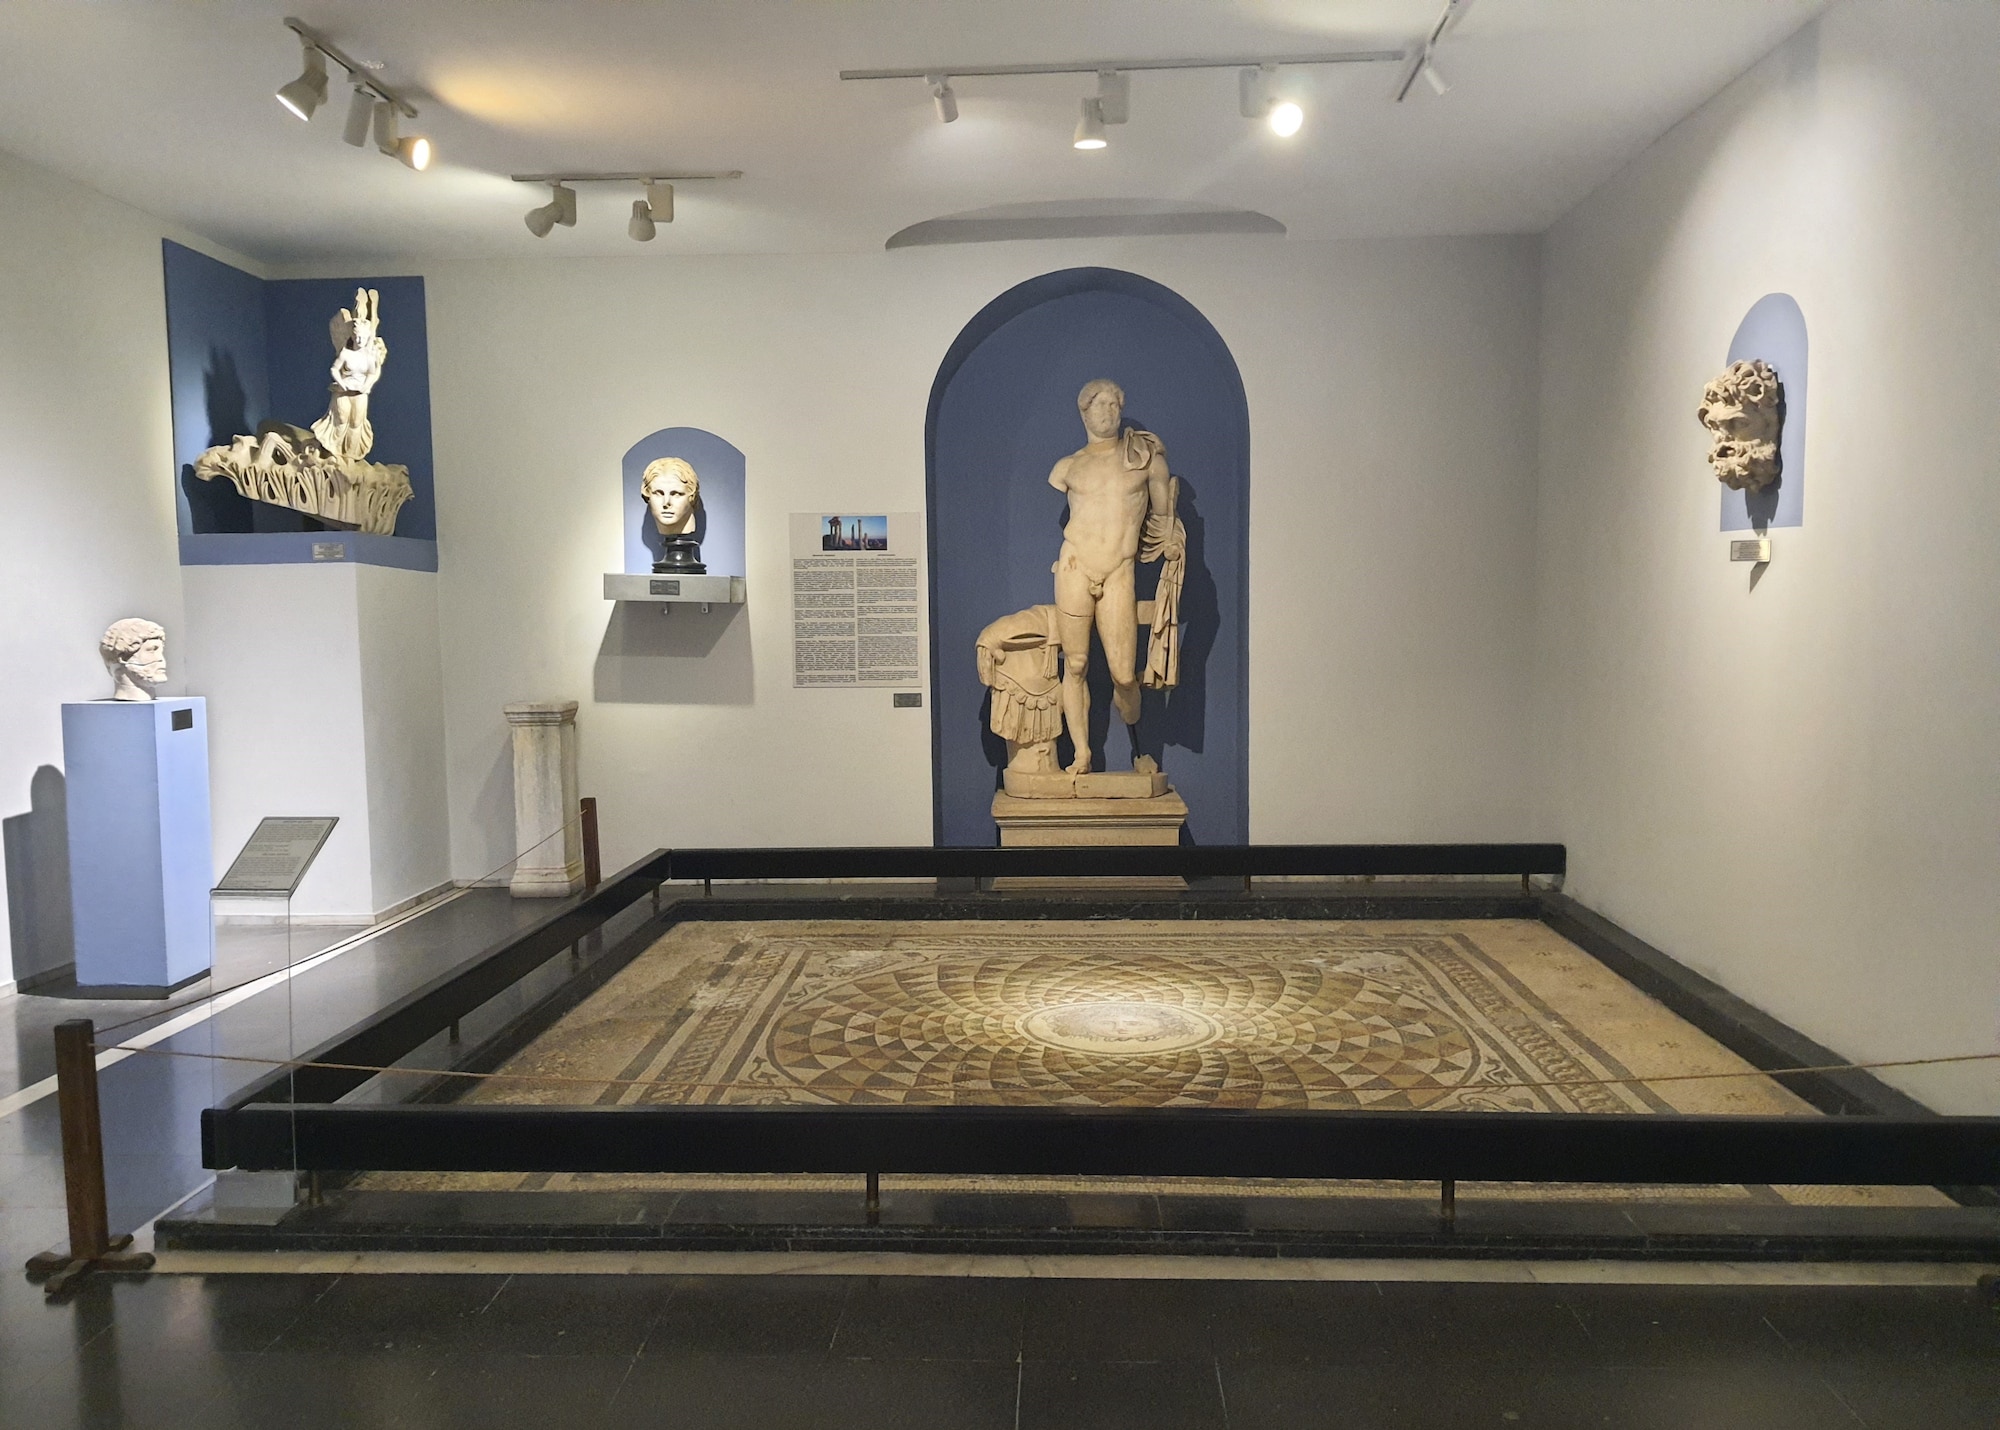 A view of the archaeological pieces exhibited in the Pergamon Museum located in the town center in Pergamon Jan. 21, 2023.